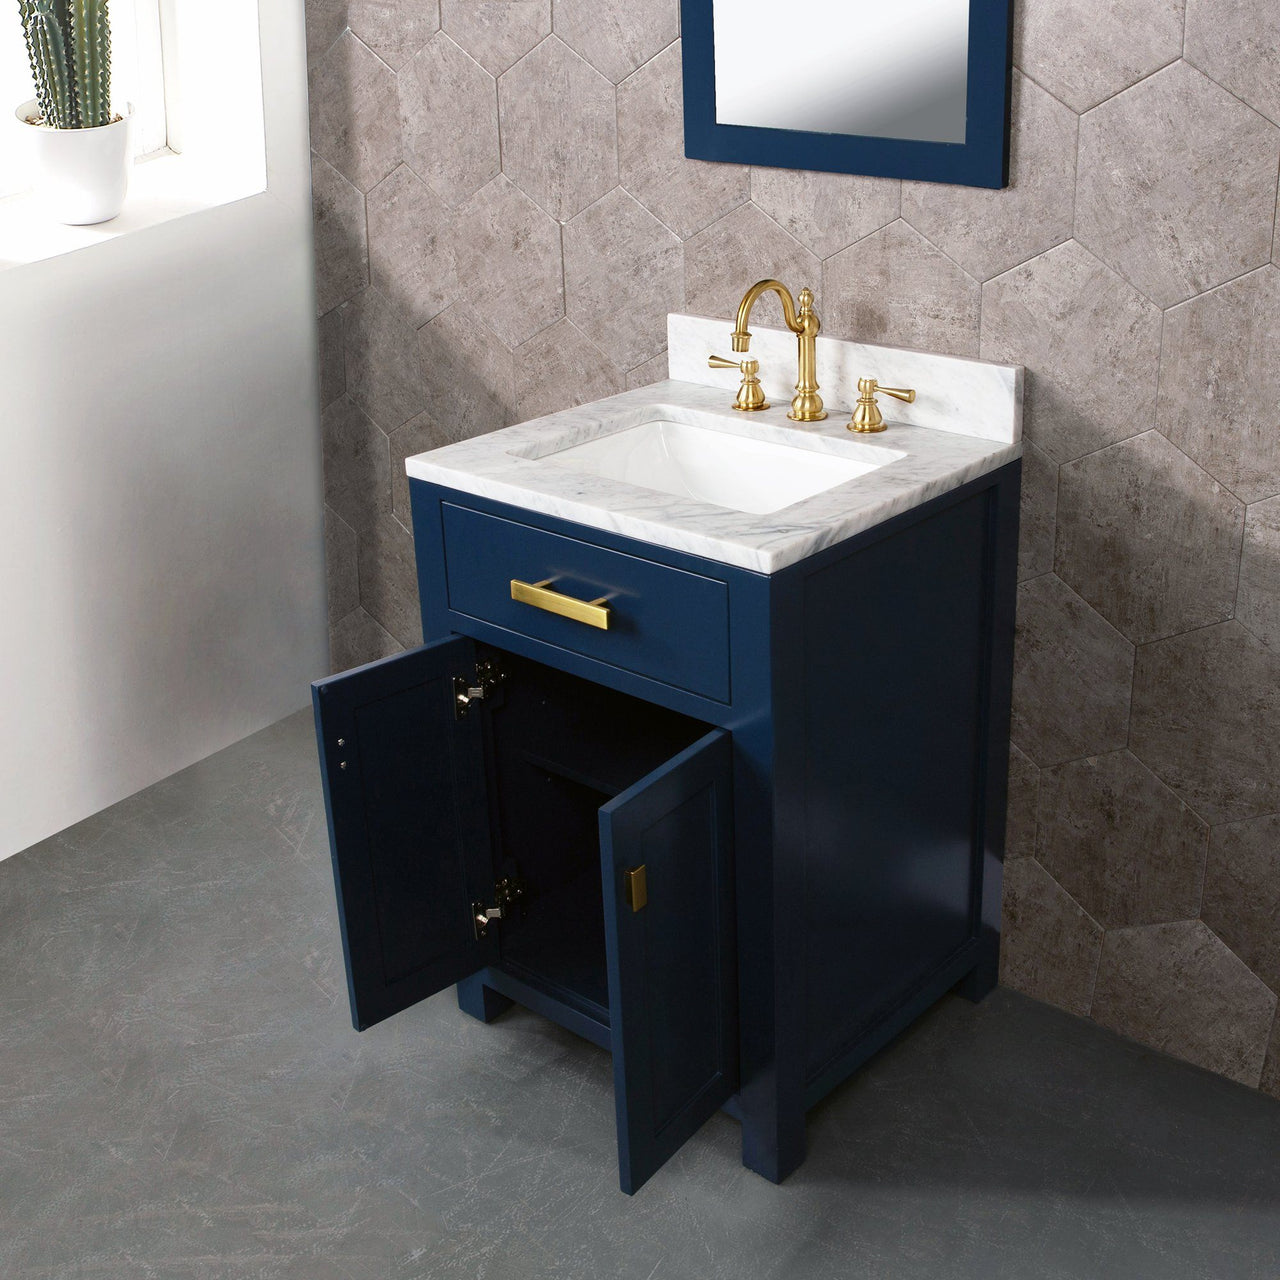 Madison 24-Inch Single Sink Carrara White Marble Vanity In Monarch Blue With Matching Mirror and F2-0012-06-TL Lavatory Faucet Vanity Water Creation 